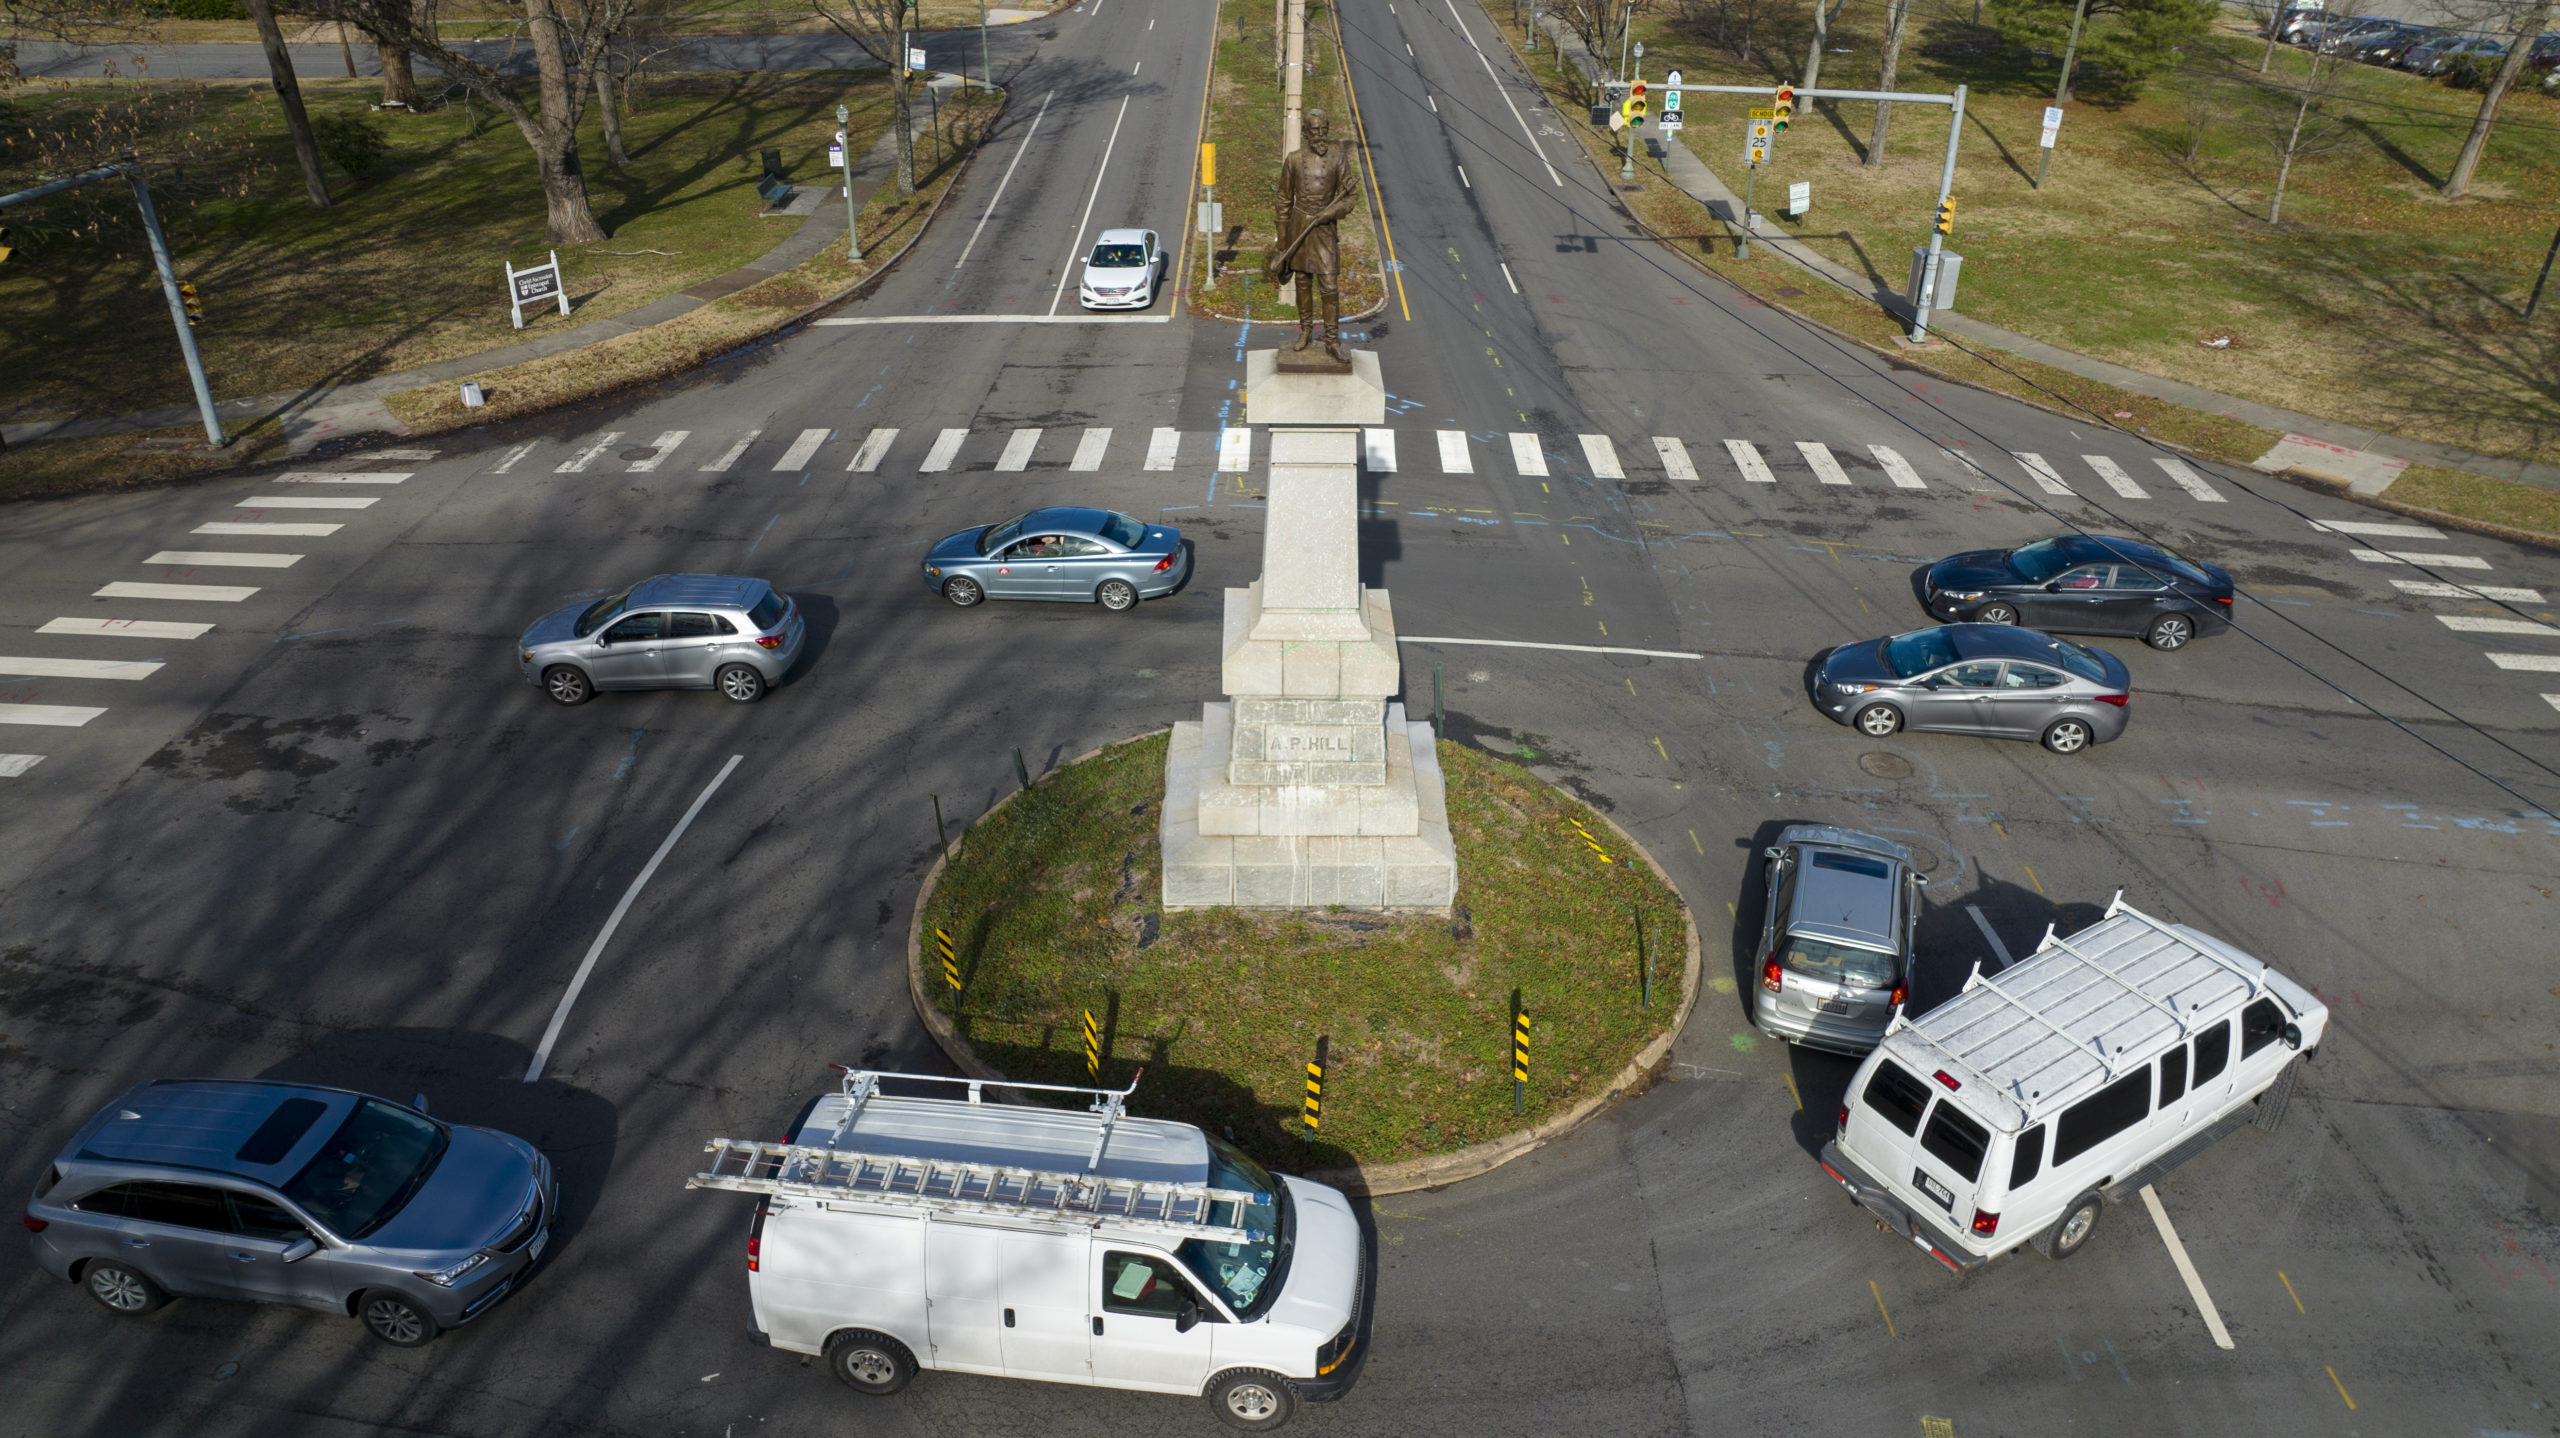 Traffic drives in the circle at the monument of confederate General A.P. Hill, which contains his remains, is in the middle of a traffic circle on Arthur Ashe Blvd. on Jan. 6 in Richmond, Virginia.